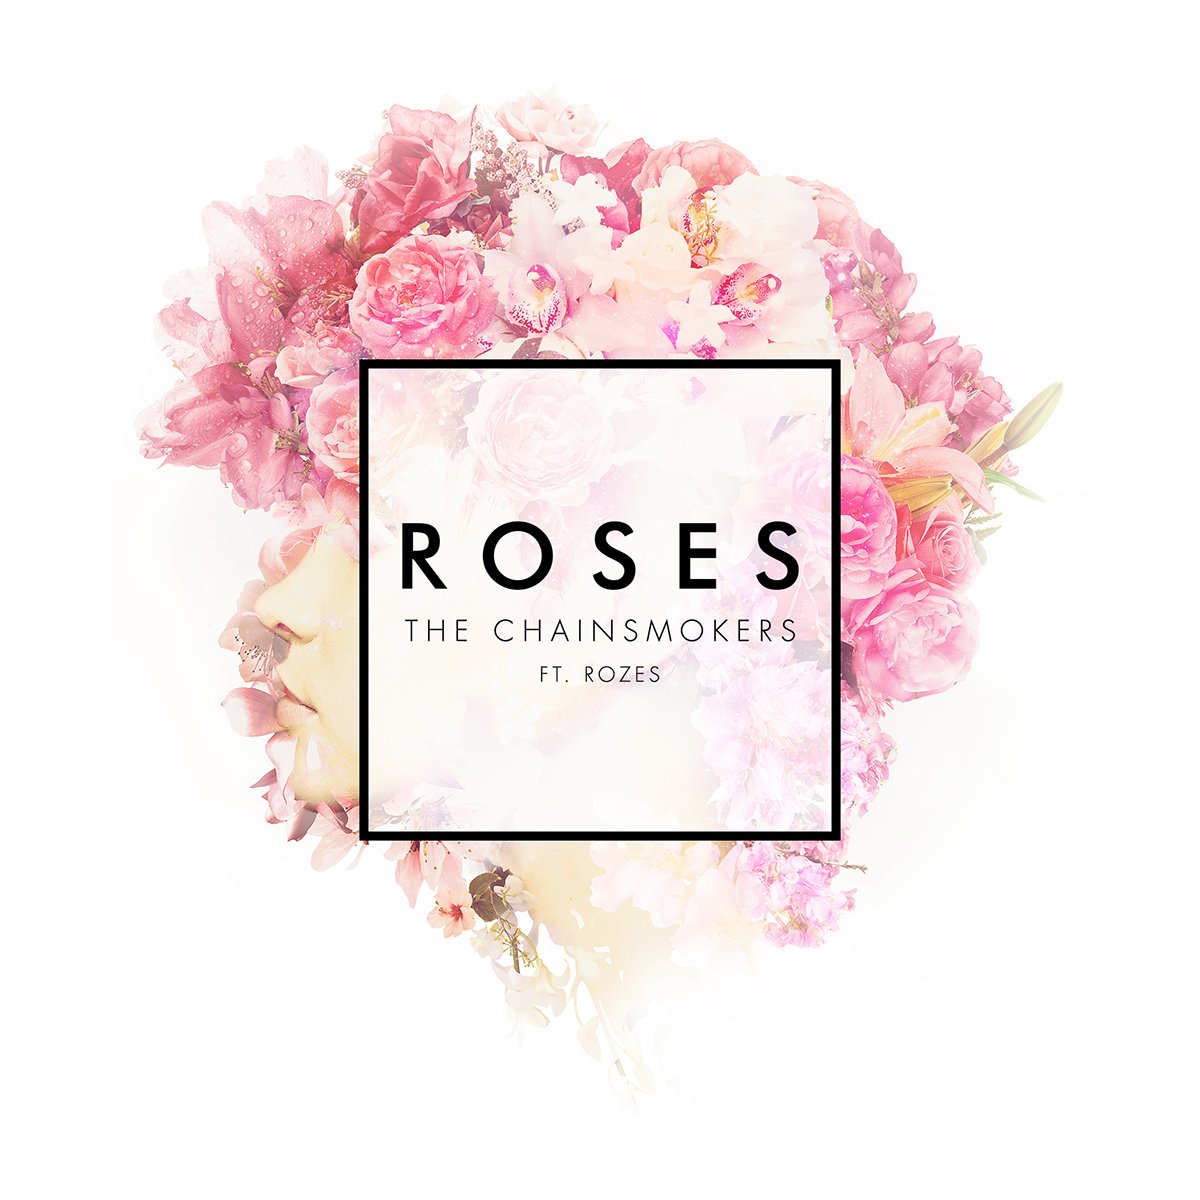 Image result for roses the chainsmokers single cover